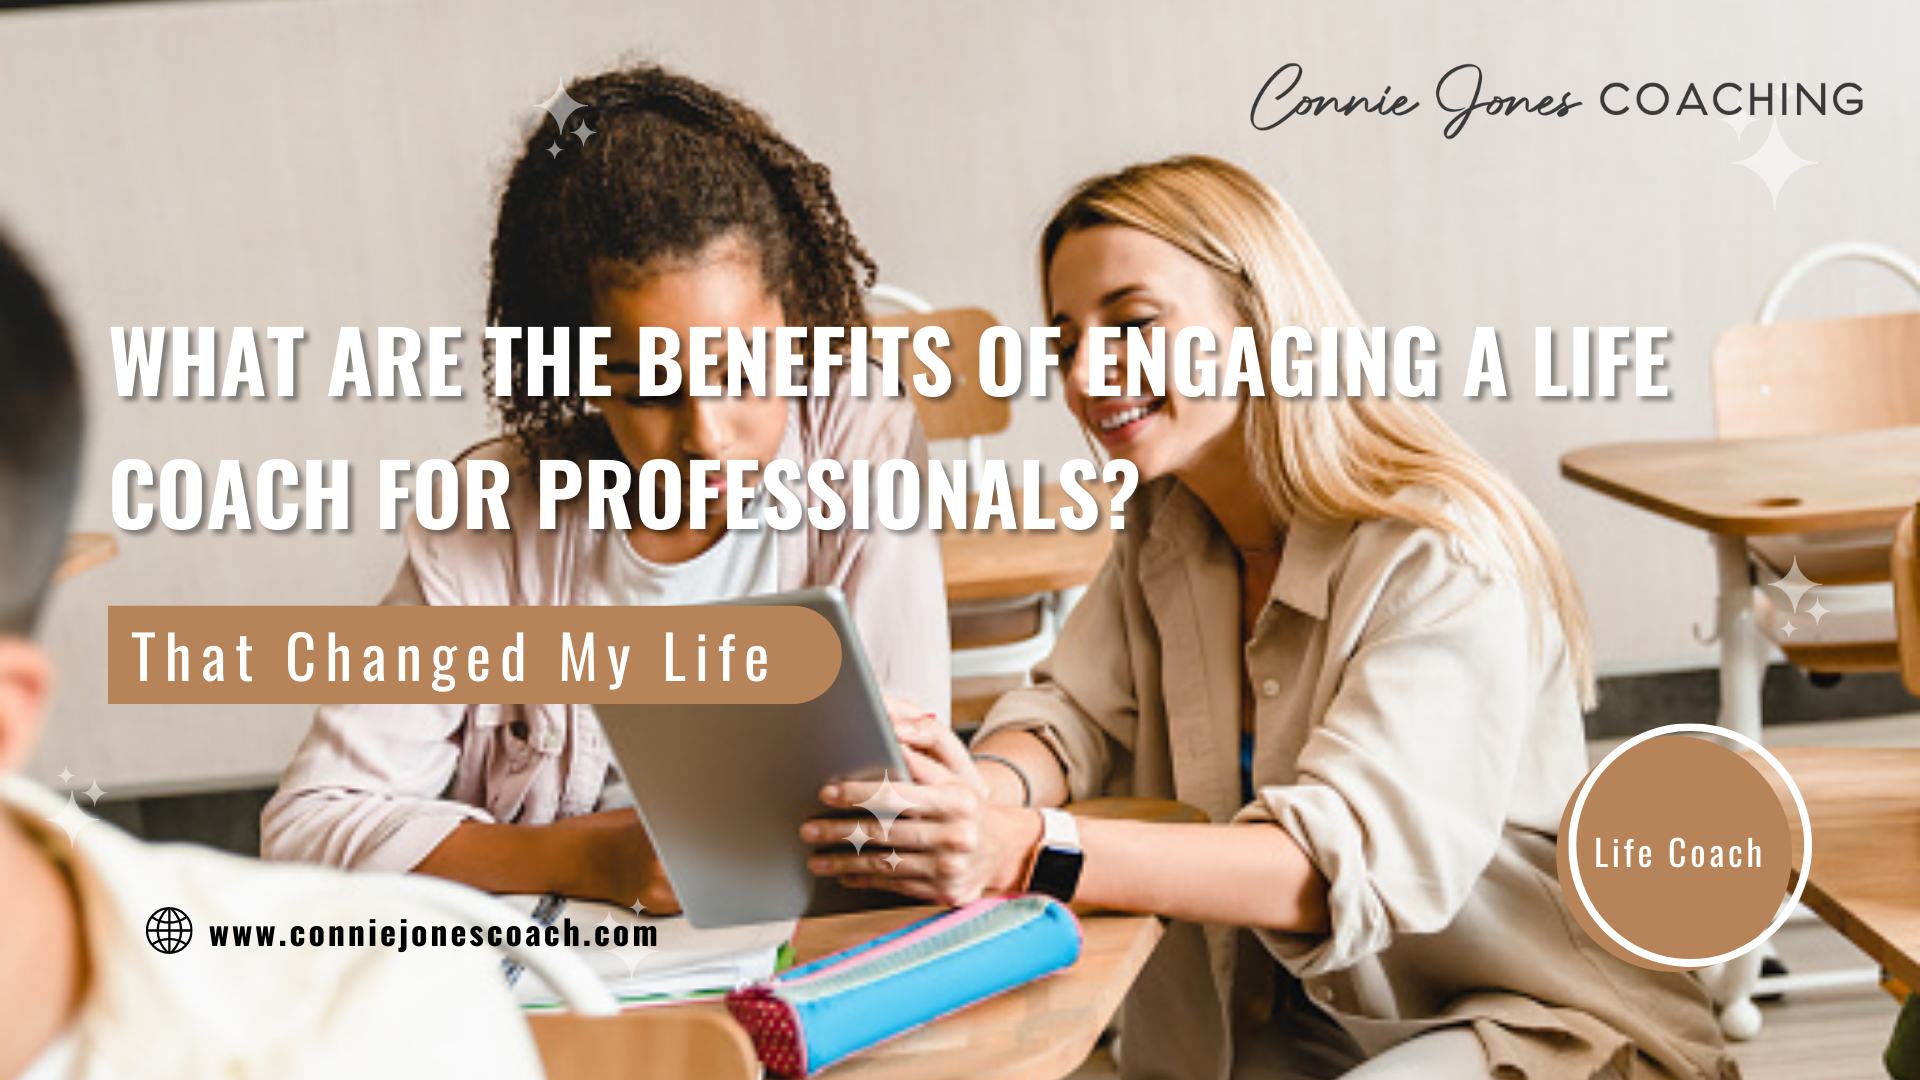 What Are the Benefits of Engaging a Life Coach for Professionals?